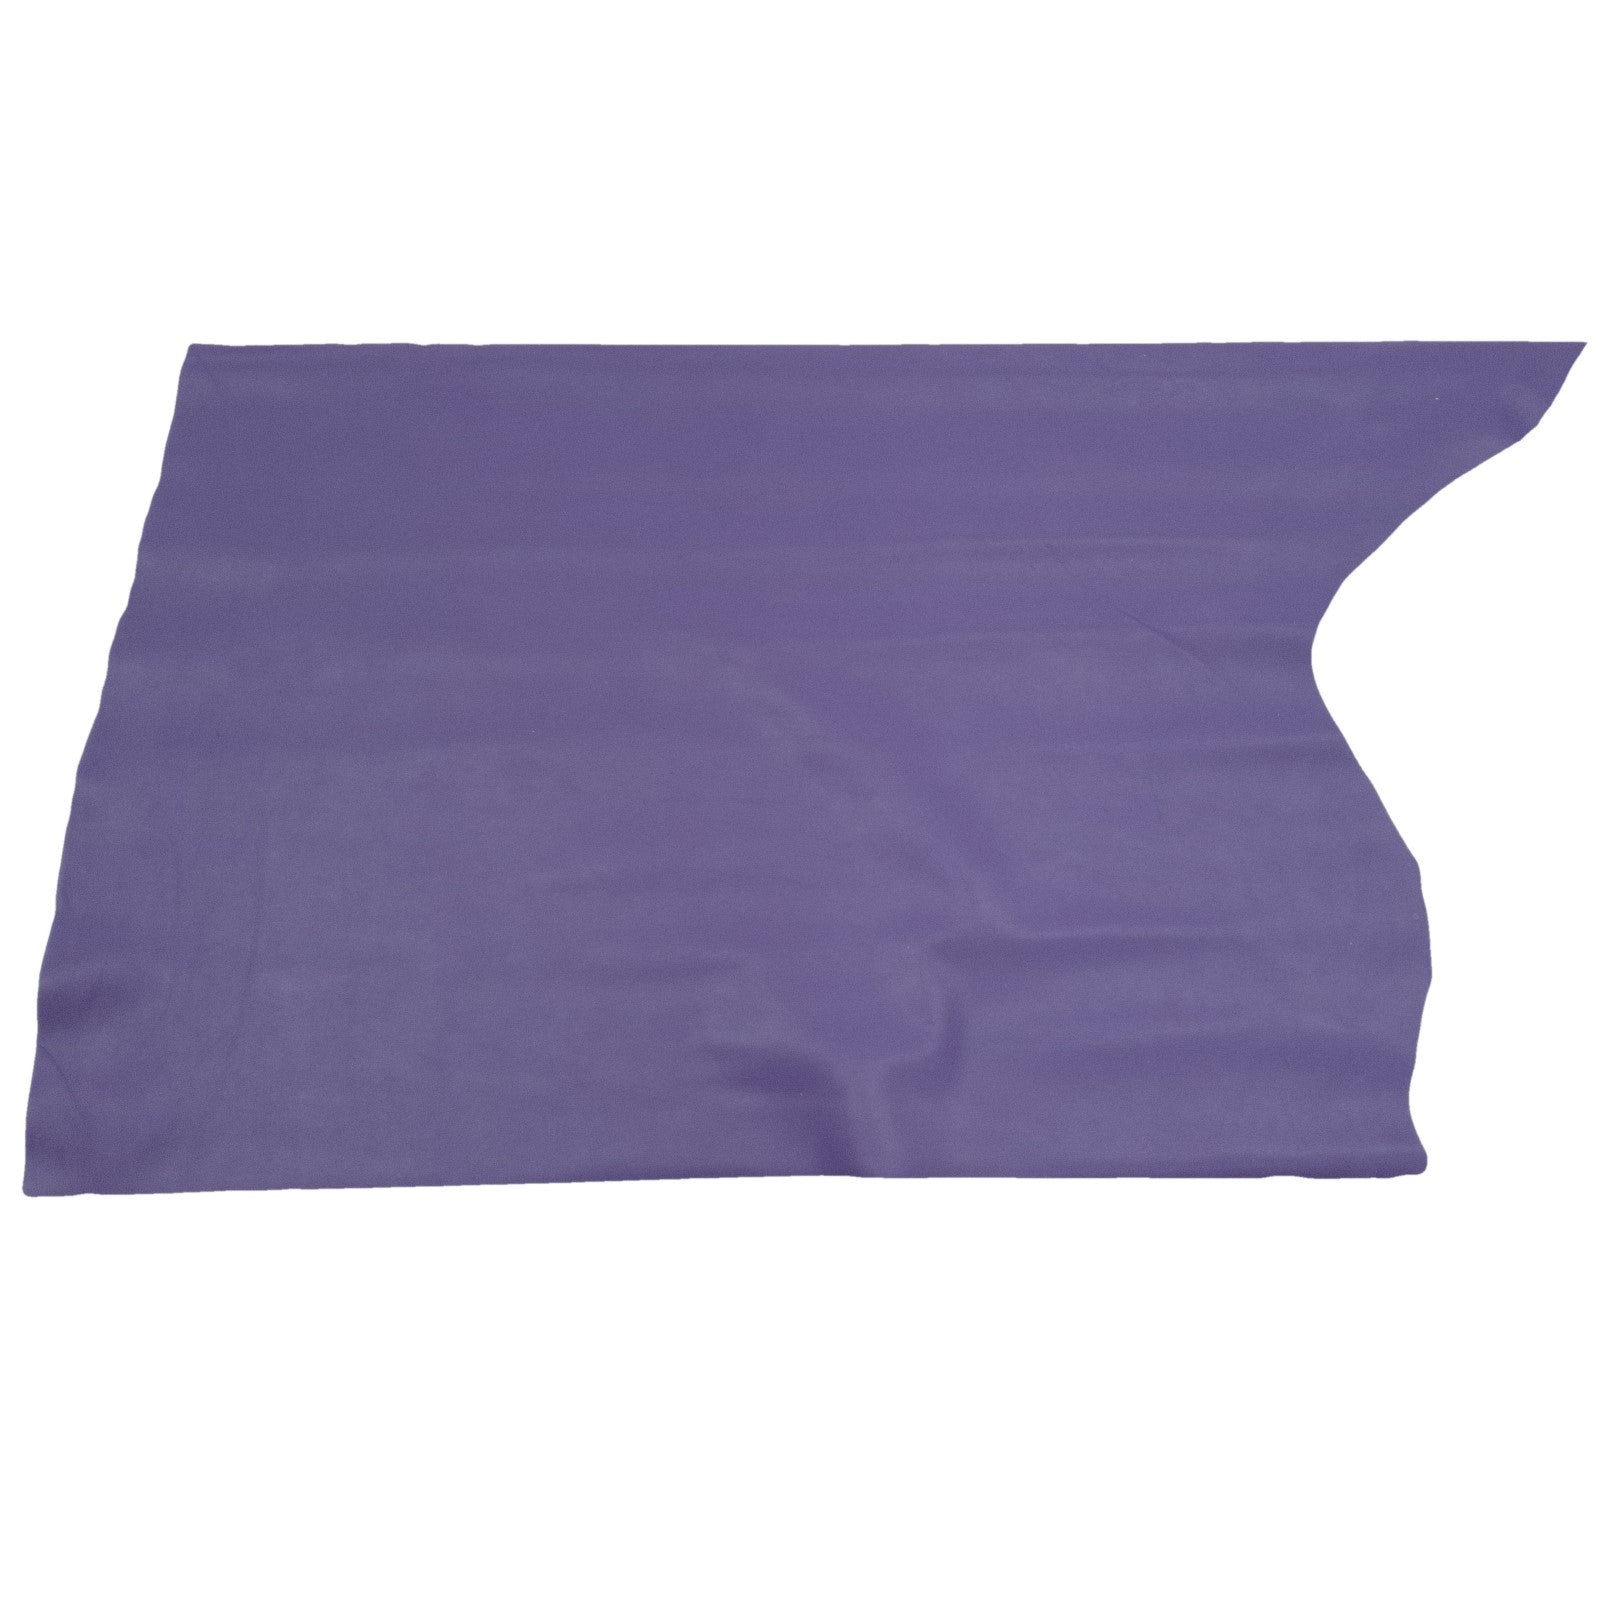 Kings Poppin' Purple, 3-3.5 oz Cow Hides, Starting Lineup, Middle Piece / 6.5-7.5 Sq Ft | The Leather Guy